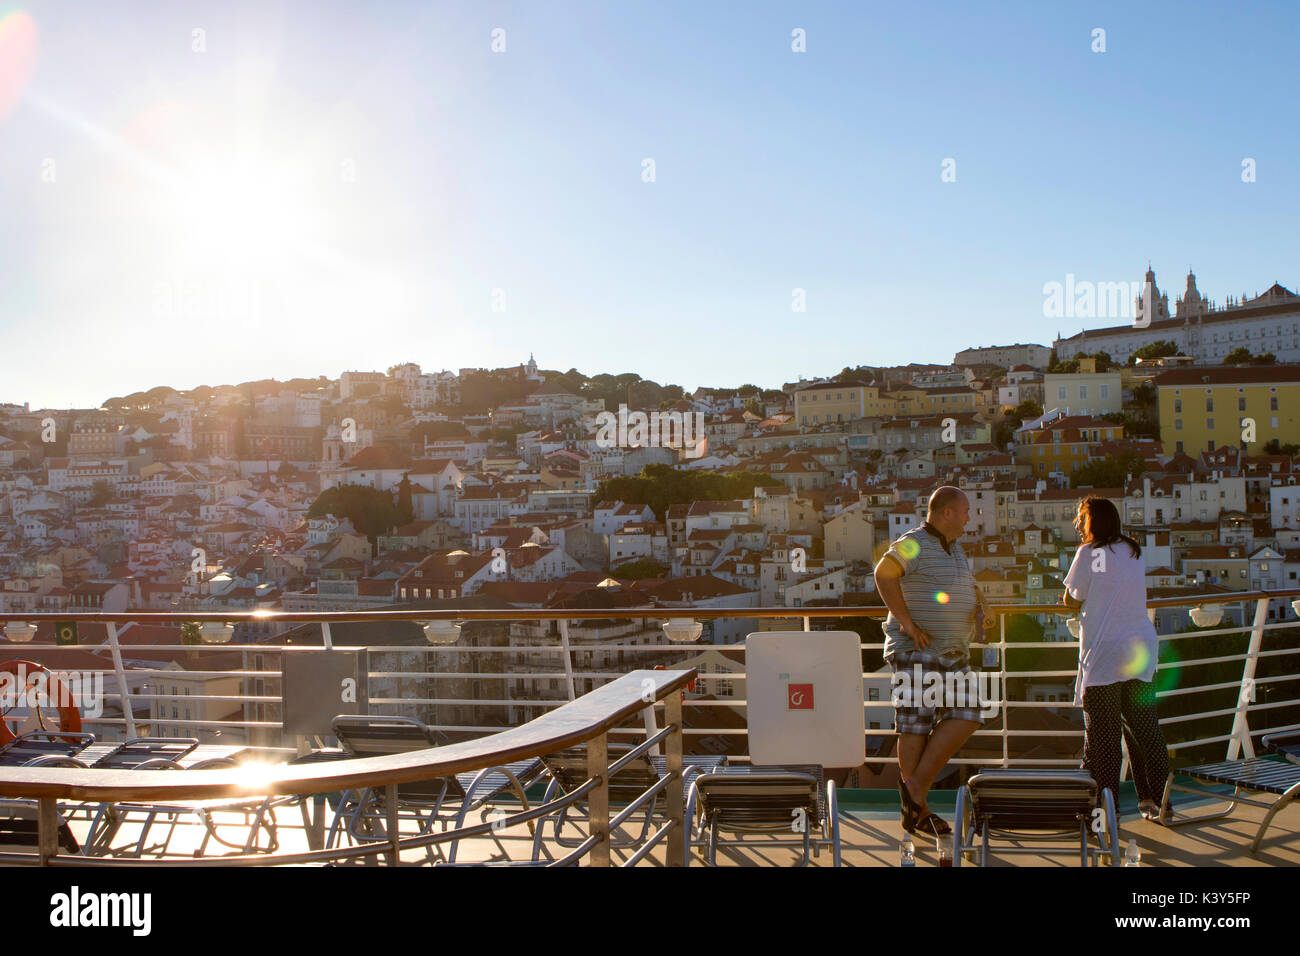 Lisbon, the capital and the largest city of Portugal in the Alfama District on the Atlantic coast in Western Europe Stock Photo